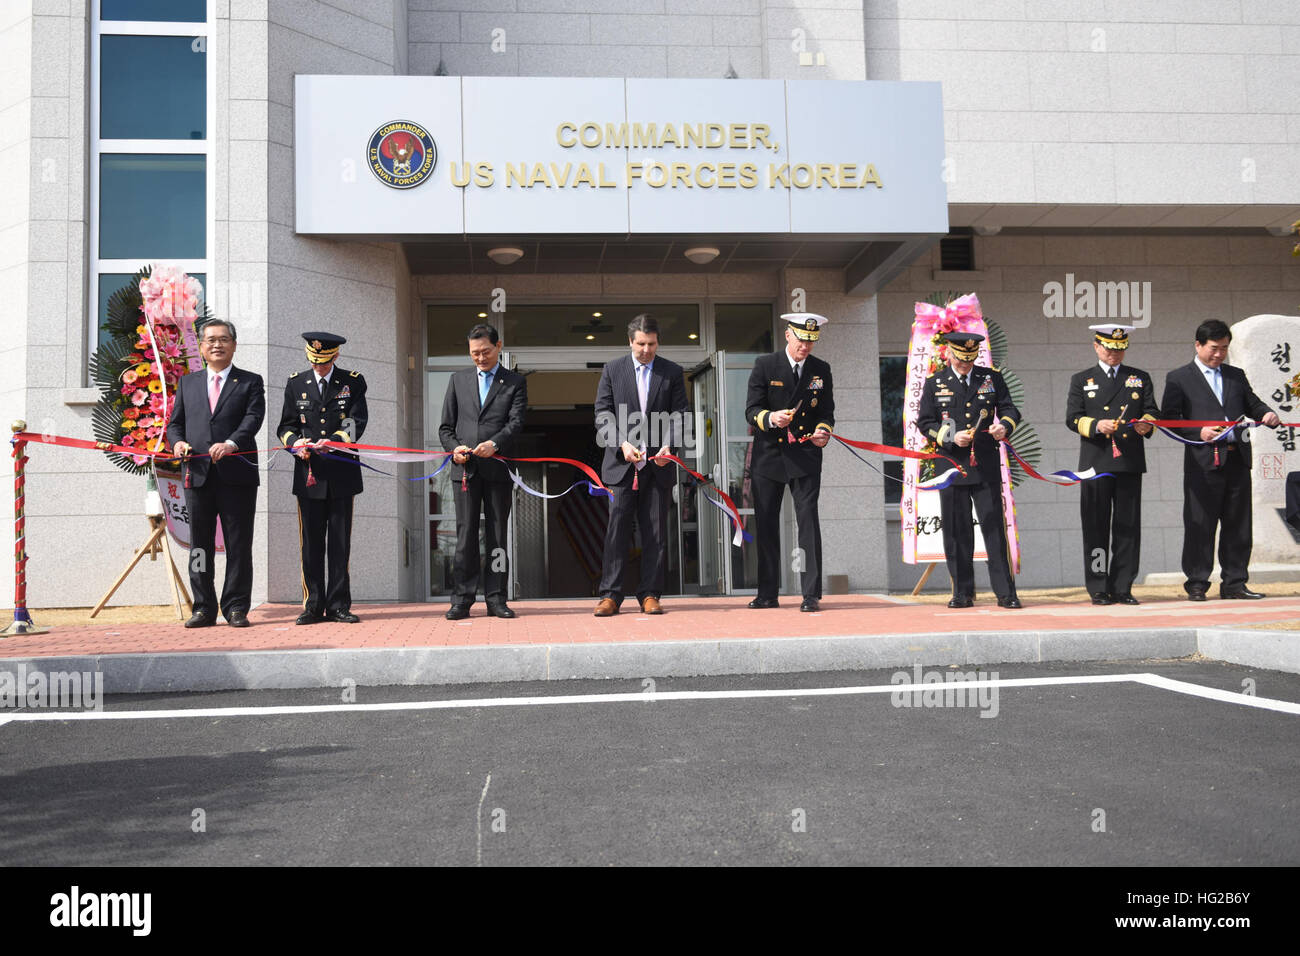 160219-N-WT427-291 BUSAN, Republic of Korea (Feb. 19 2016) -  Rear. Adm. Bill Byrne, commander U.S. Naval Forces Korea (CNFK), Gen. Curtis Scaparrotti,  commander, U.S. Forces Korea, VAdm. Ki-sik Lee, commander Republic of Korea (ROK) Fleet, Maj. Gen. James Walton, director of transformation and re-stationing for U.S. Forces Korea, Hon. Mark Lippert, U.S. ambassador to the ROK, Jung Gyung-jin, mayor of Busan for administrative affairs and Lee Jong-cheol, Nam-gu district mayor cut the ribbon of CNFK's new head quarters building during a ribbon-cutting ceremony. This ceremony marks the opening o Stock Photo